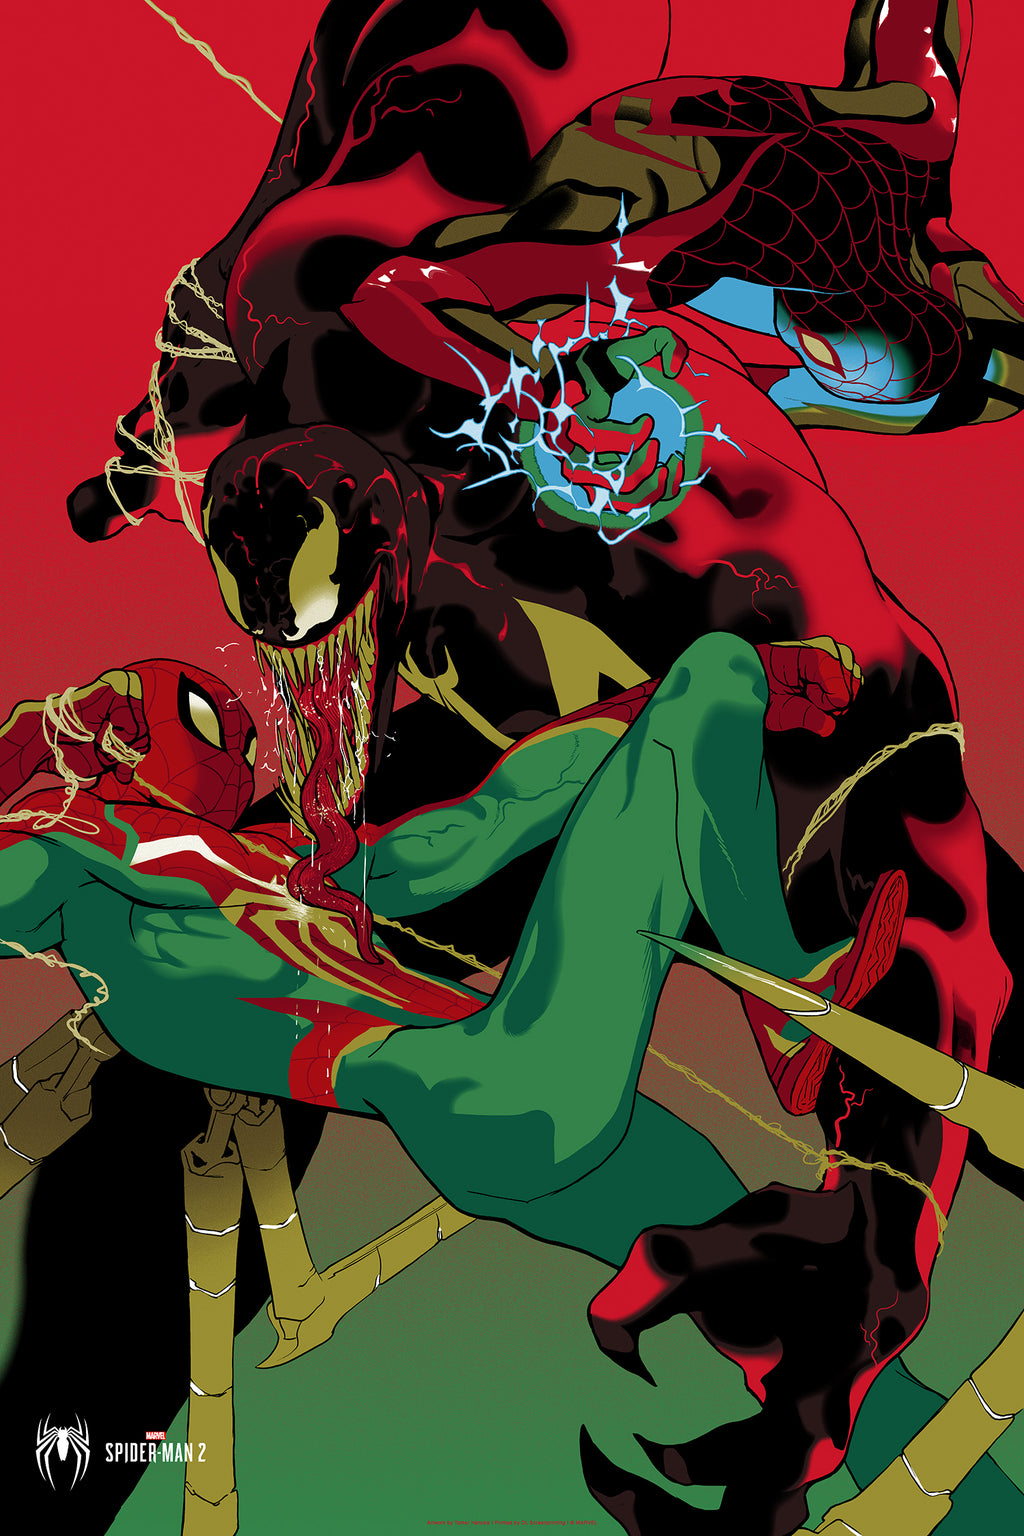 Everything You Need To Know About Marvel's Spider-Man 2 - Green